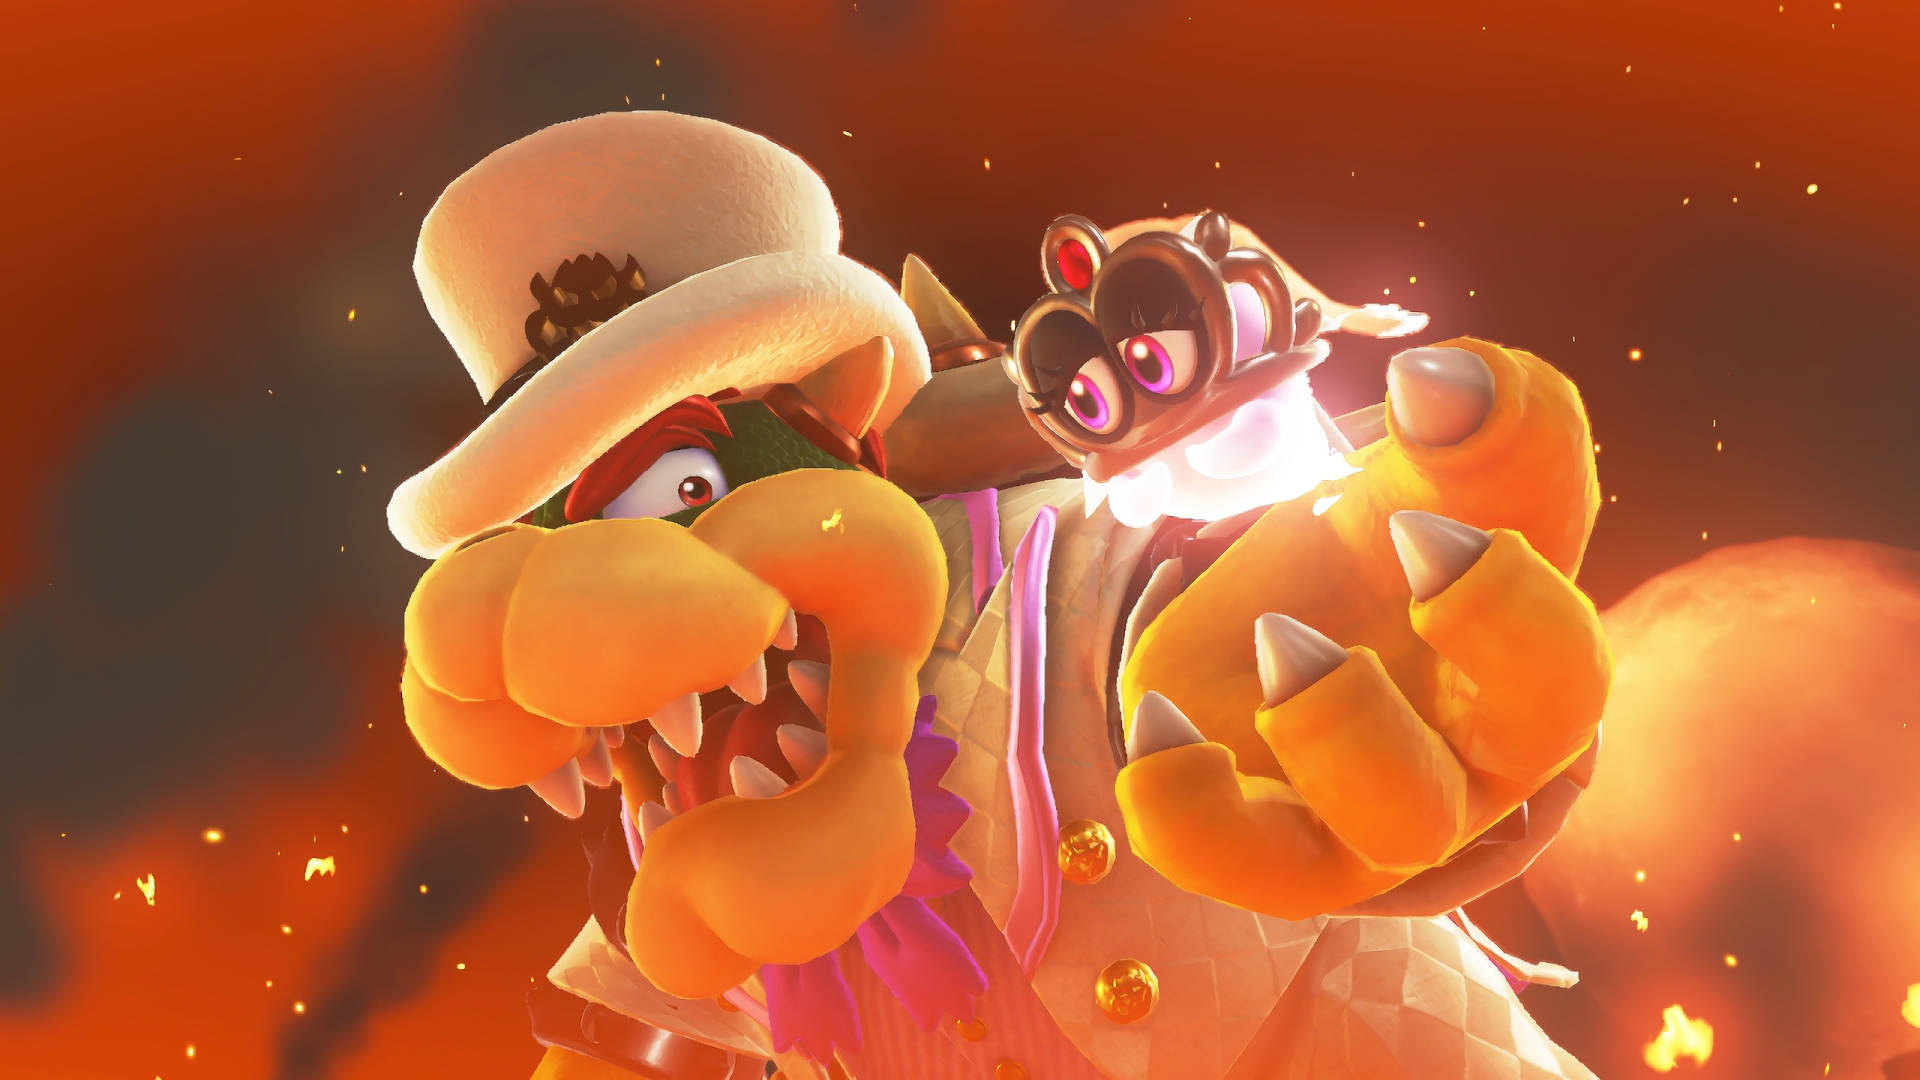 Super Mario Odyssey Bowser And Tiara In Flames